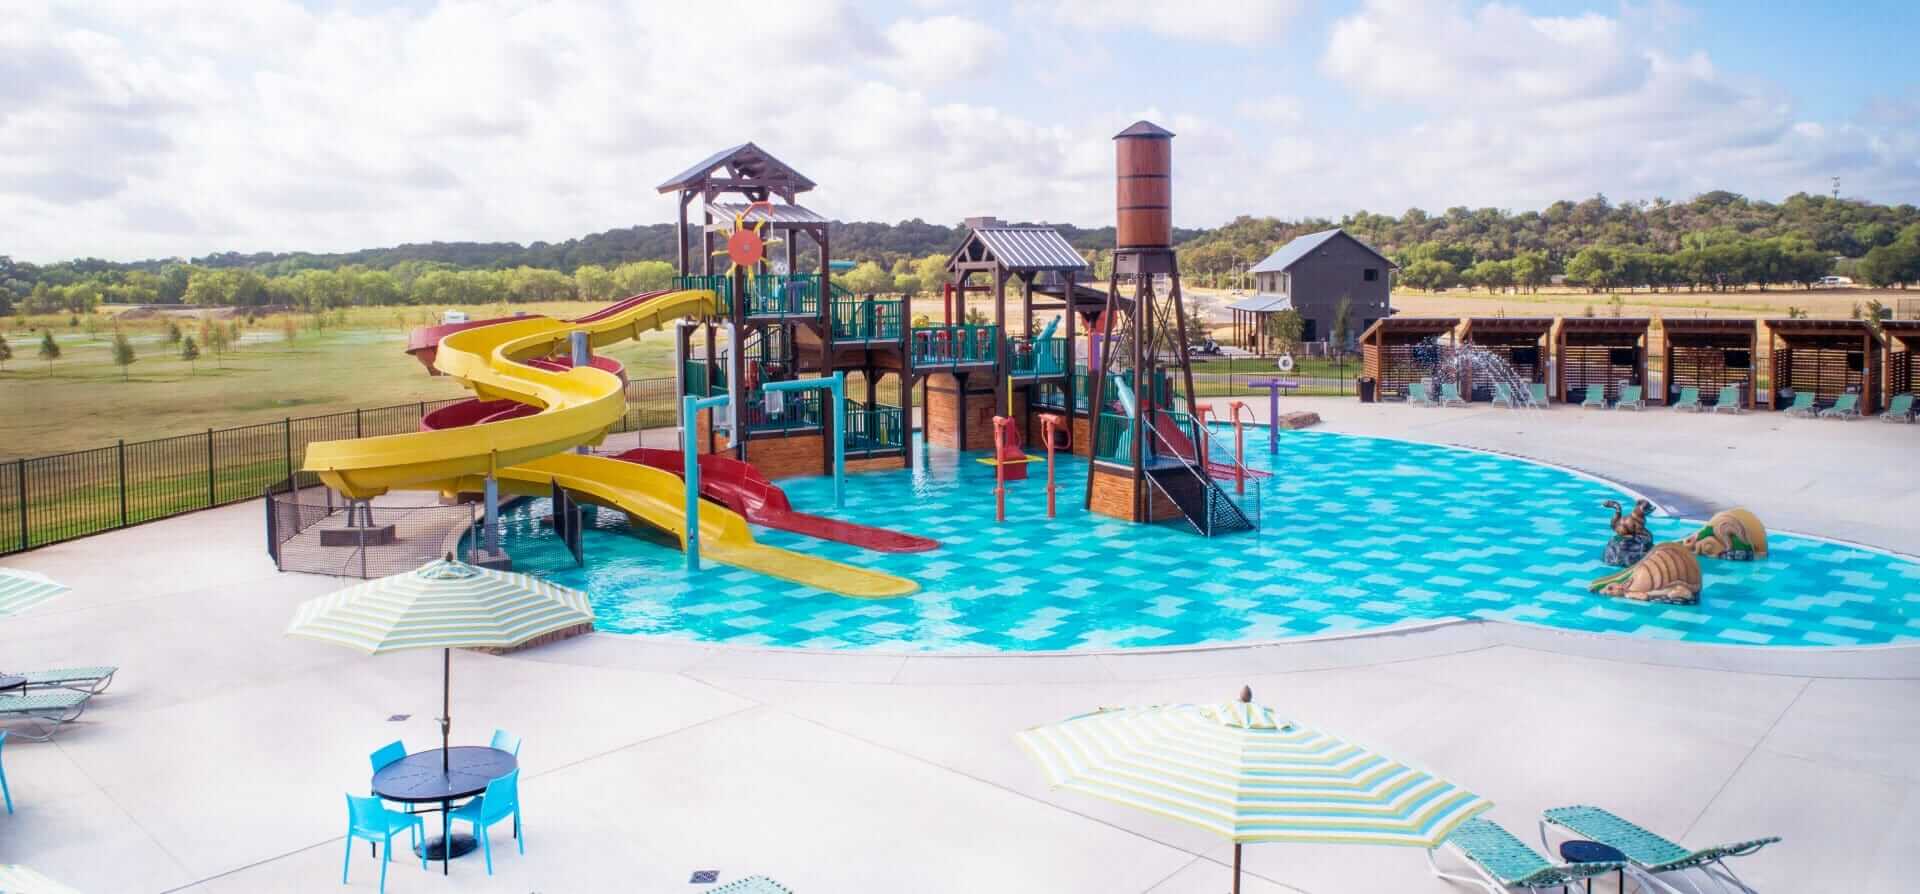 A wide shot of the entire water play structure by Interactive Play at the Camp Fimfo RV Park in Waco, Texas.